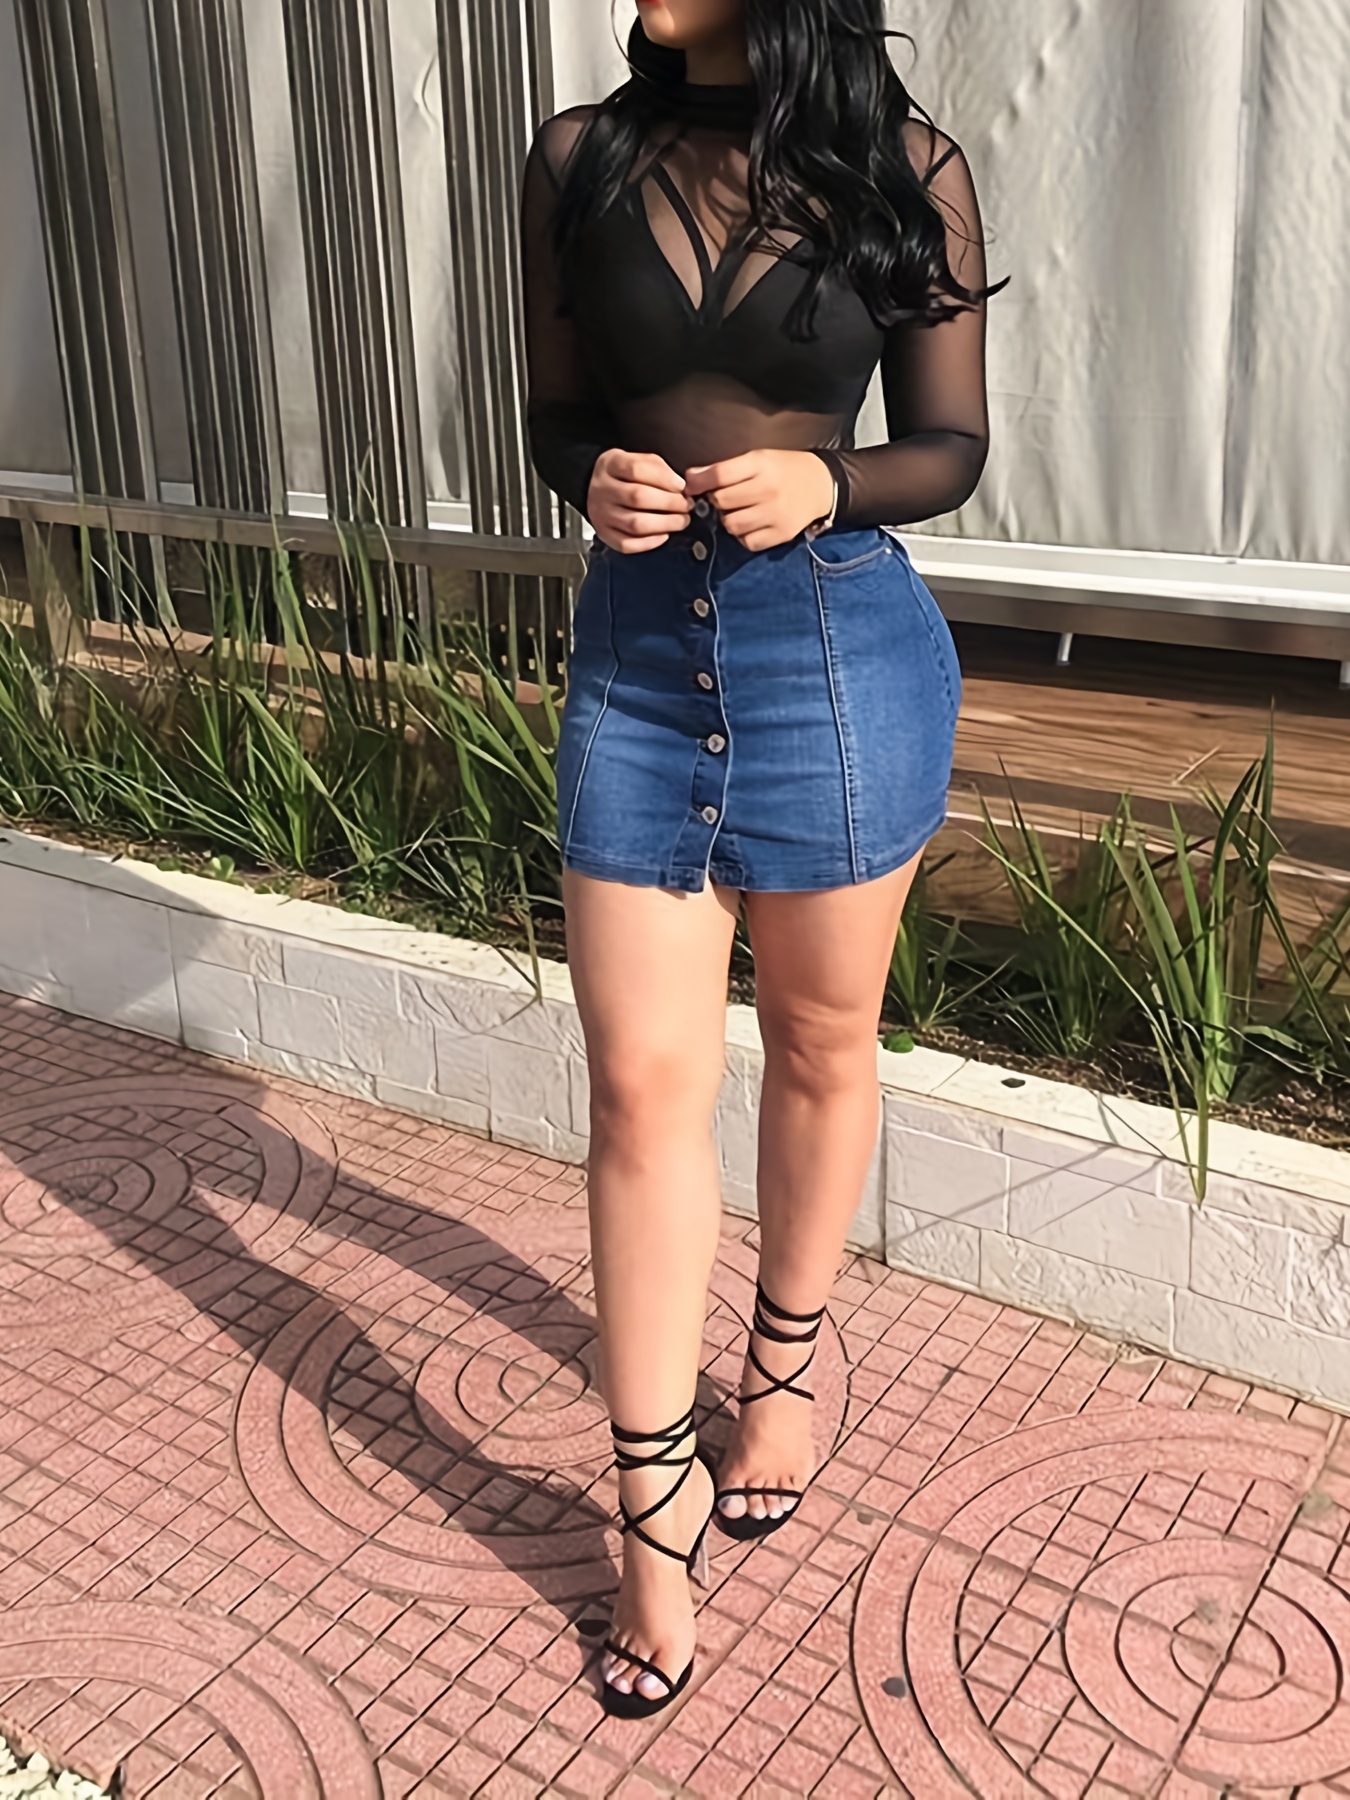 single breasted high strech denim skirt bodycon slash pockets high wasits denim skirt with sexy classic style sing breasted